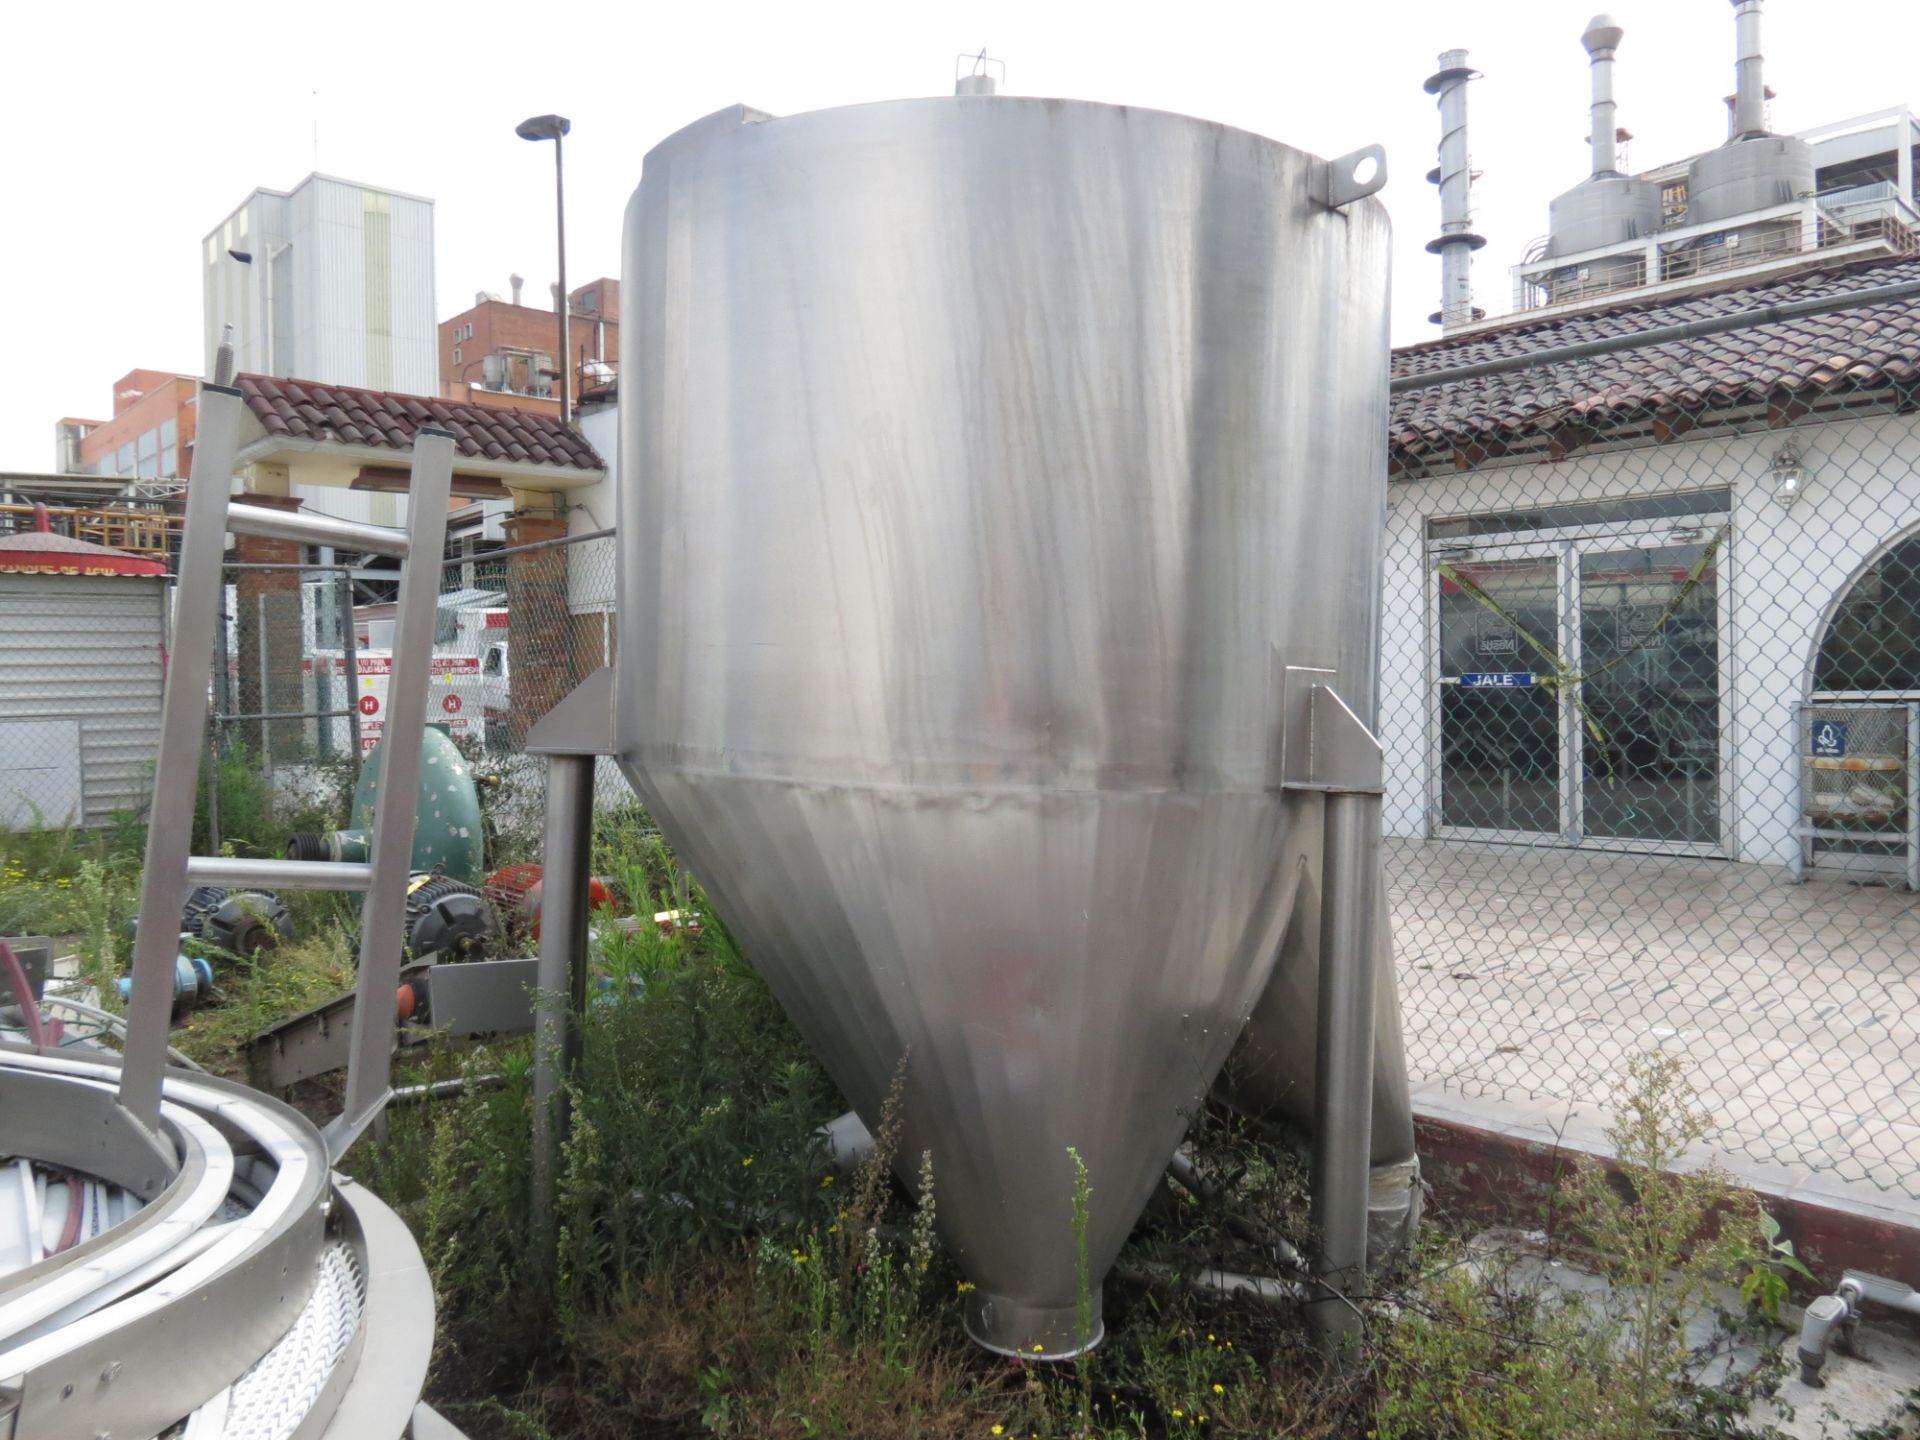 Stainless Steel Tank of 1.93 m in diameter, Includes Strong Parts conveyor belt. - Image 7 of 8